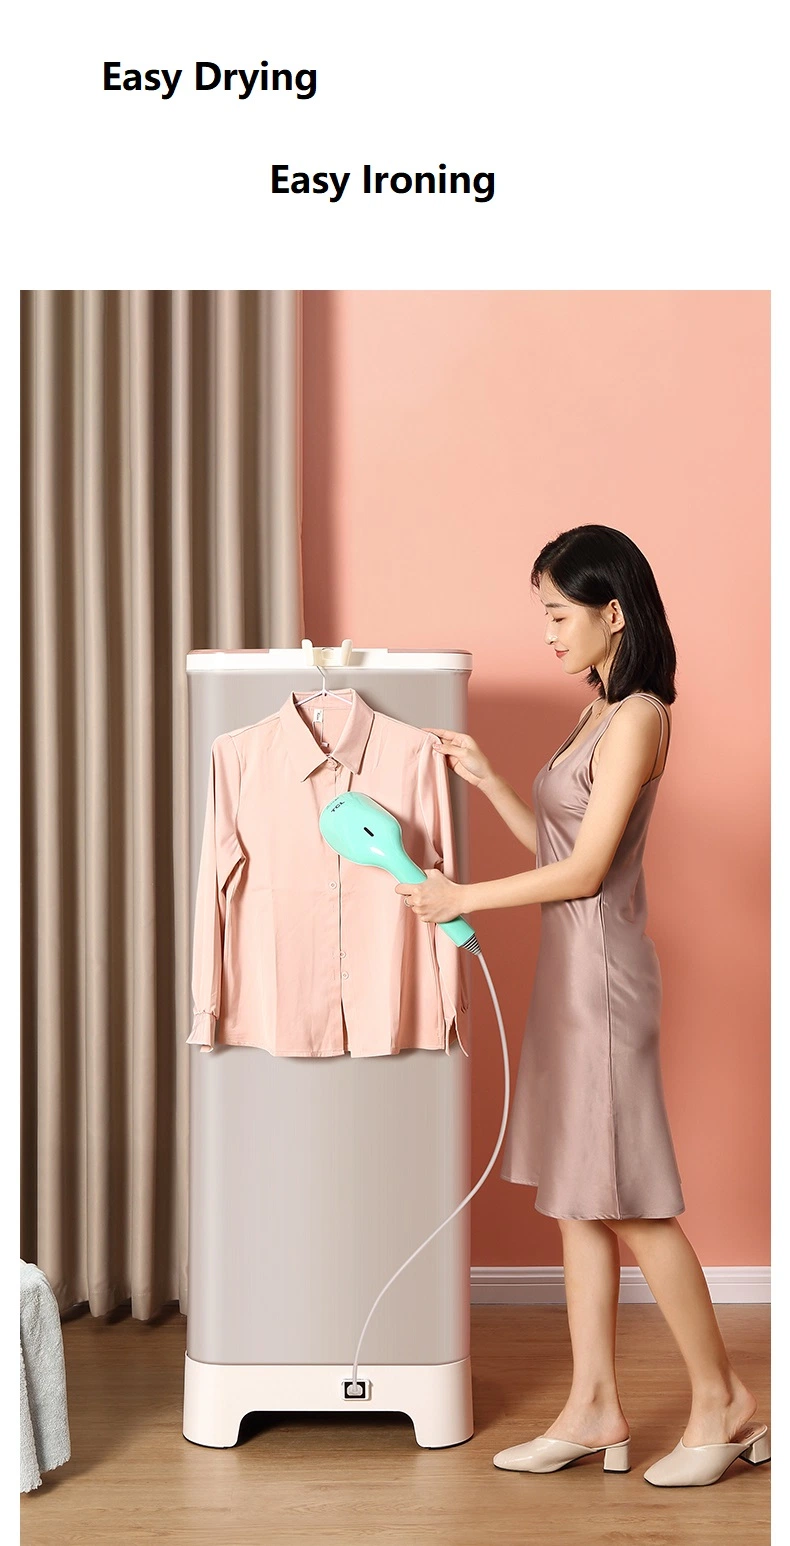 Portable and Foldable Clothes Dryer Electric Clothes Drying Machine Smart Clothes Dryer Machine for Household